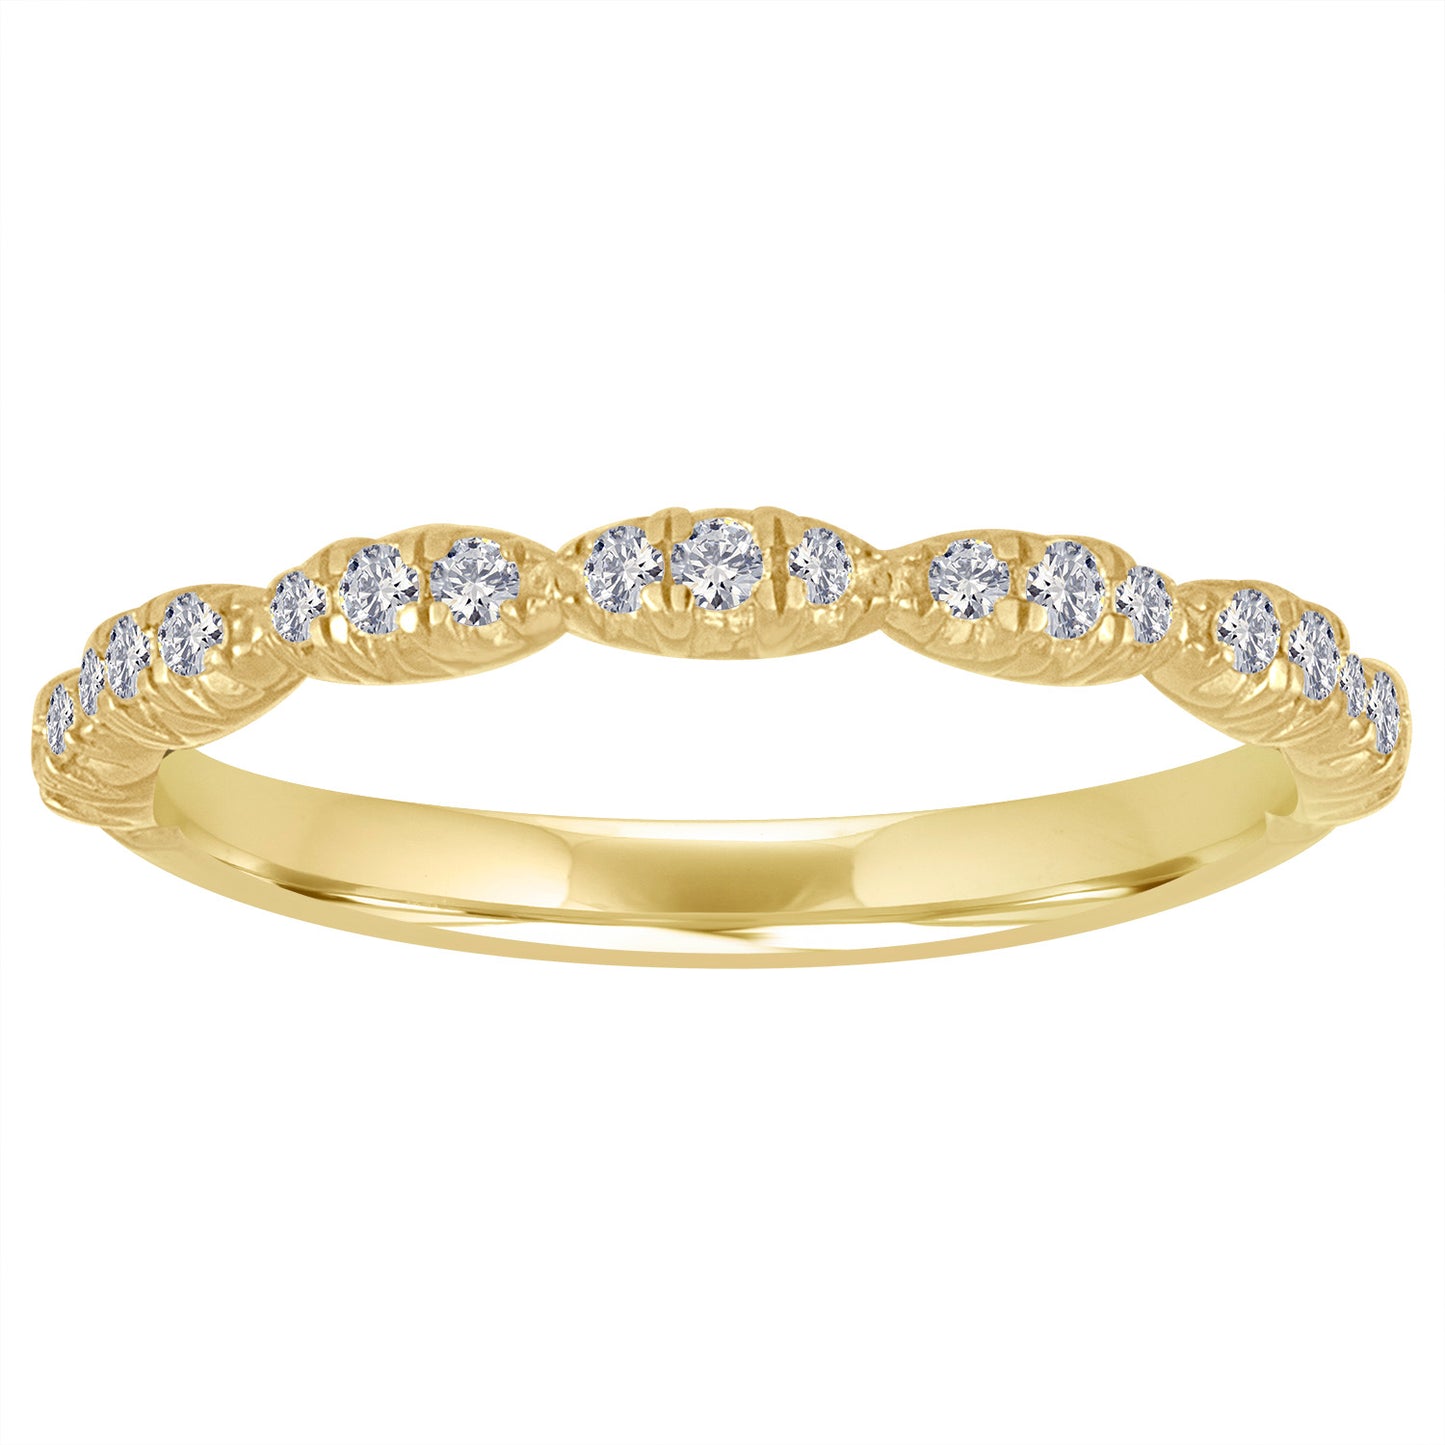 Yellow gold skinny micro pave band with round diamonds.  